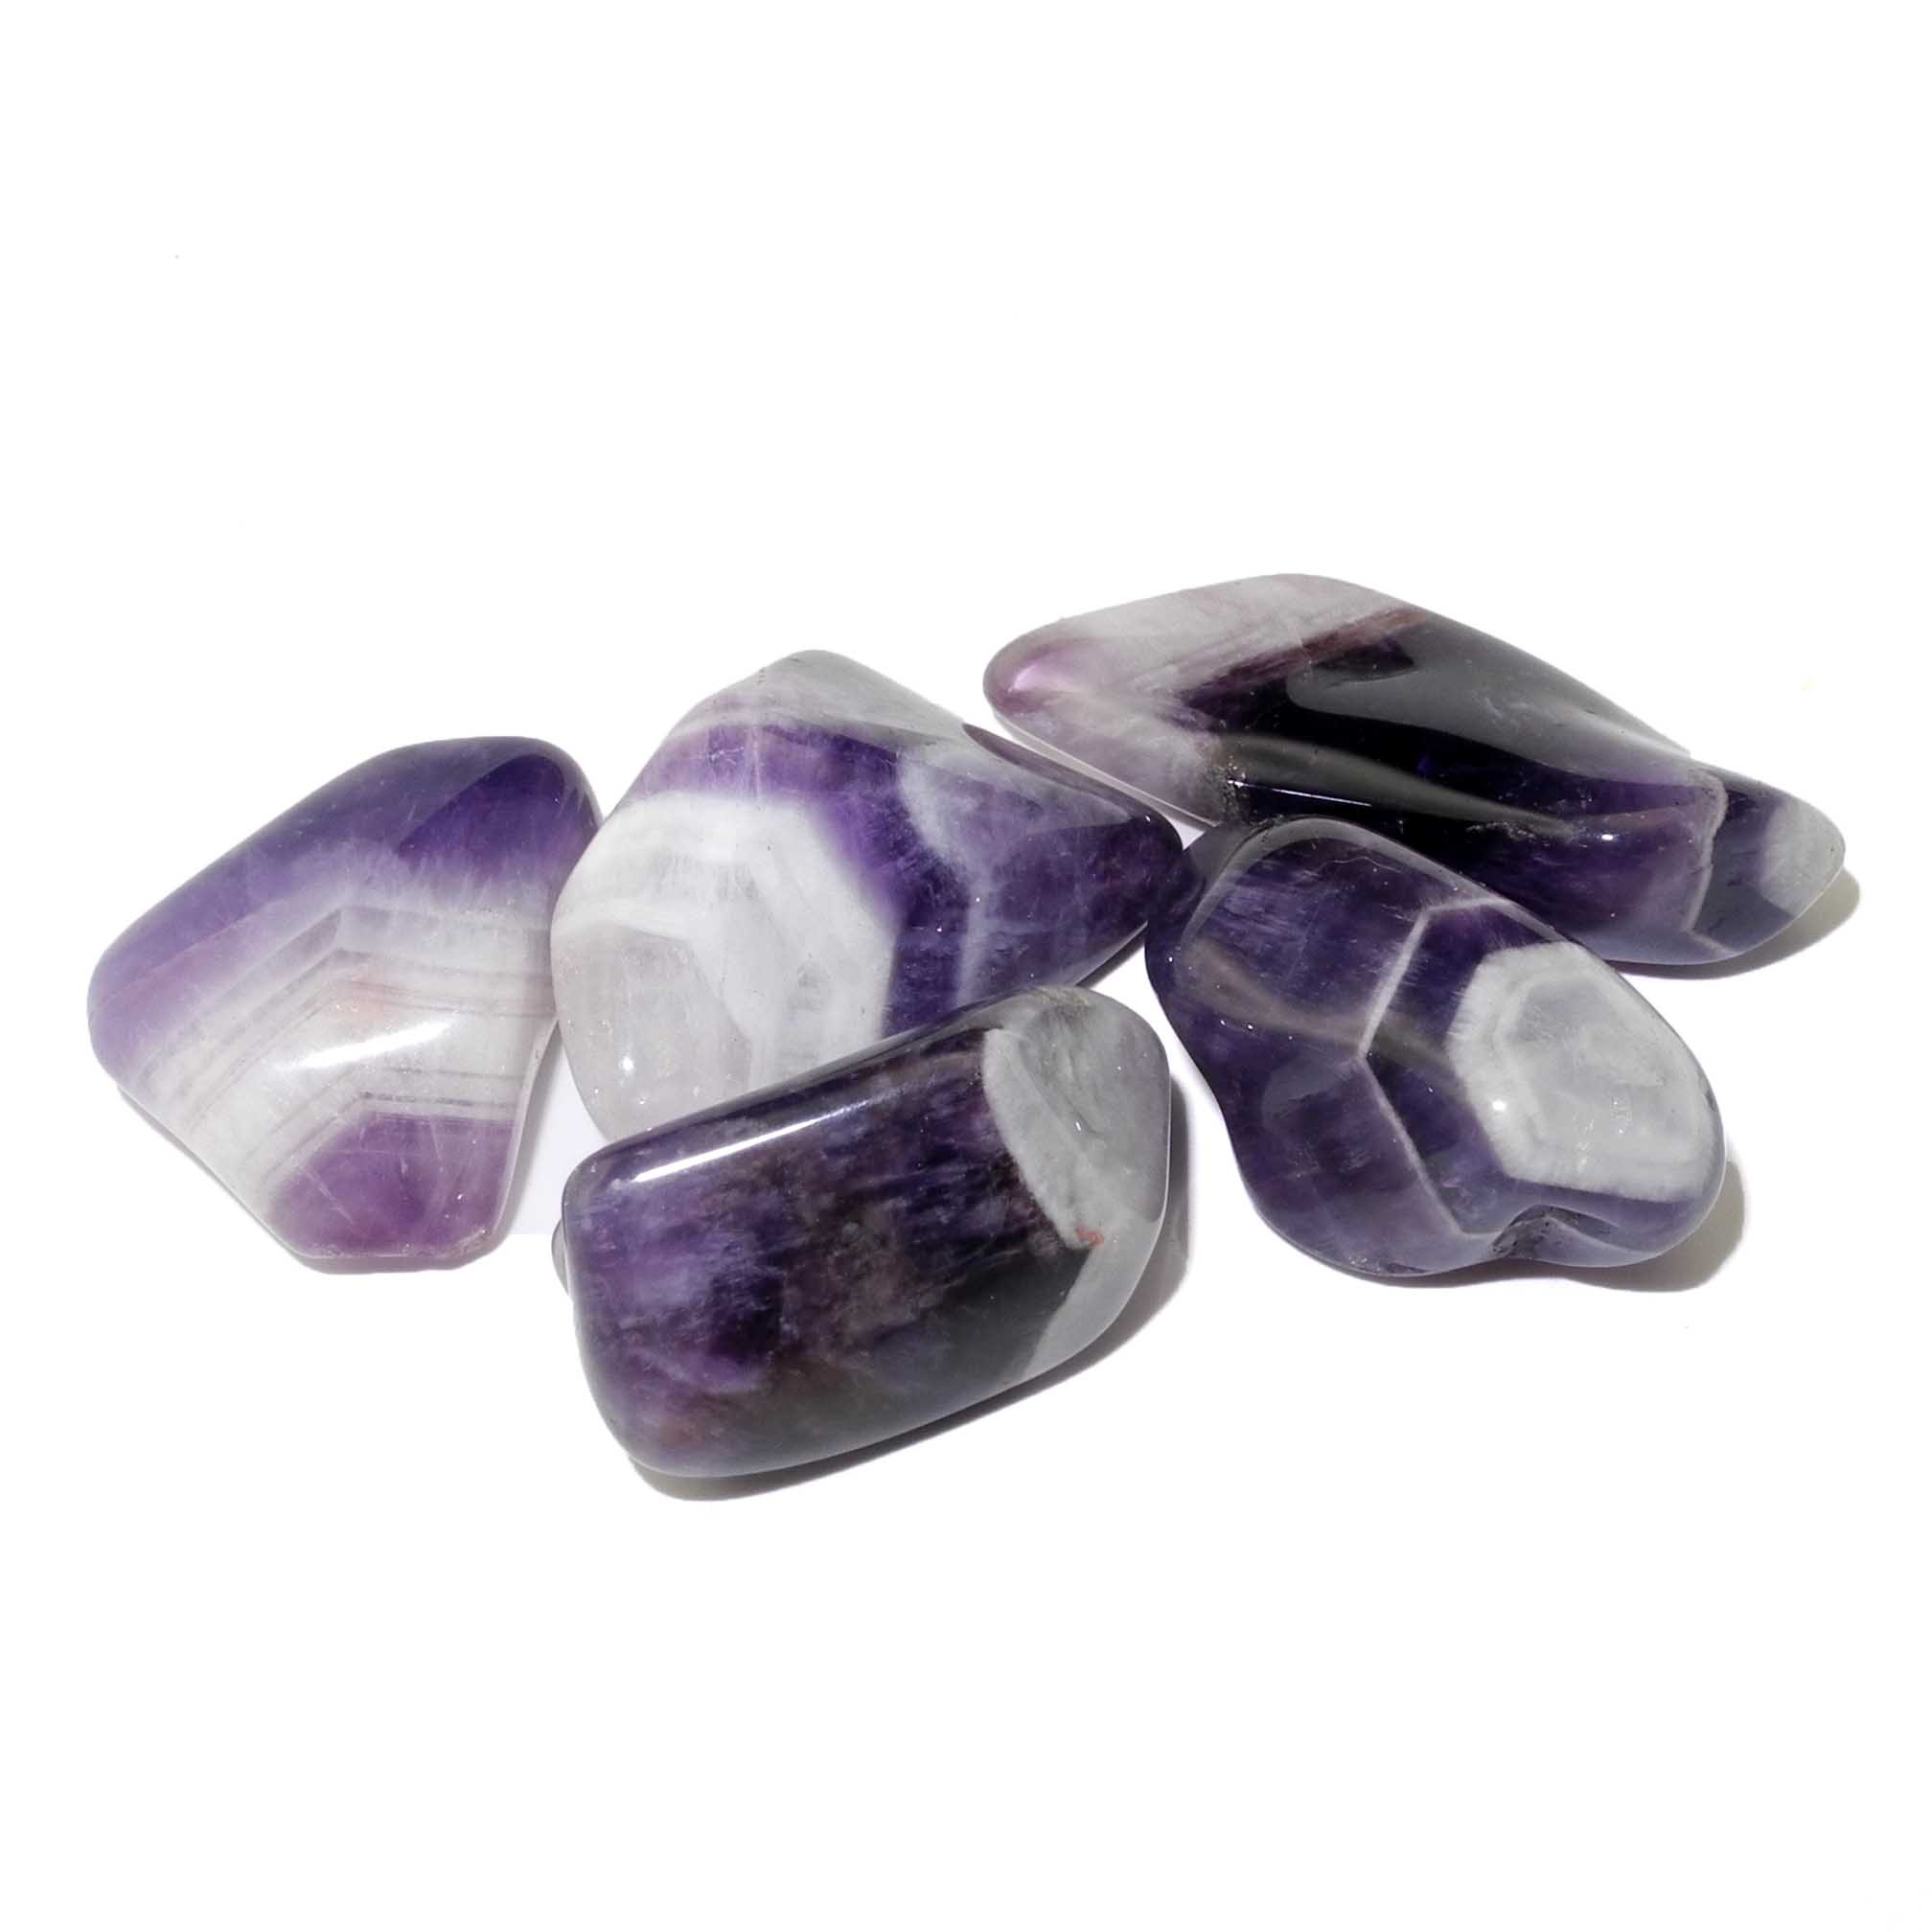 CHEVRON AMETHYST TUMBLED STONE – Buy Healing Crystals and Learn ...